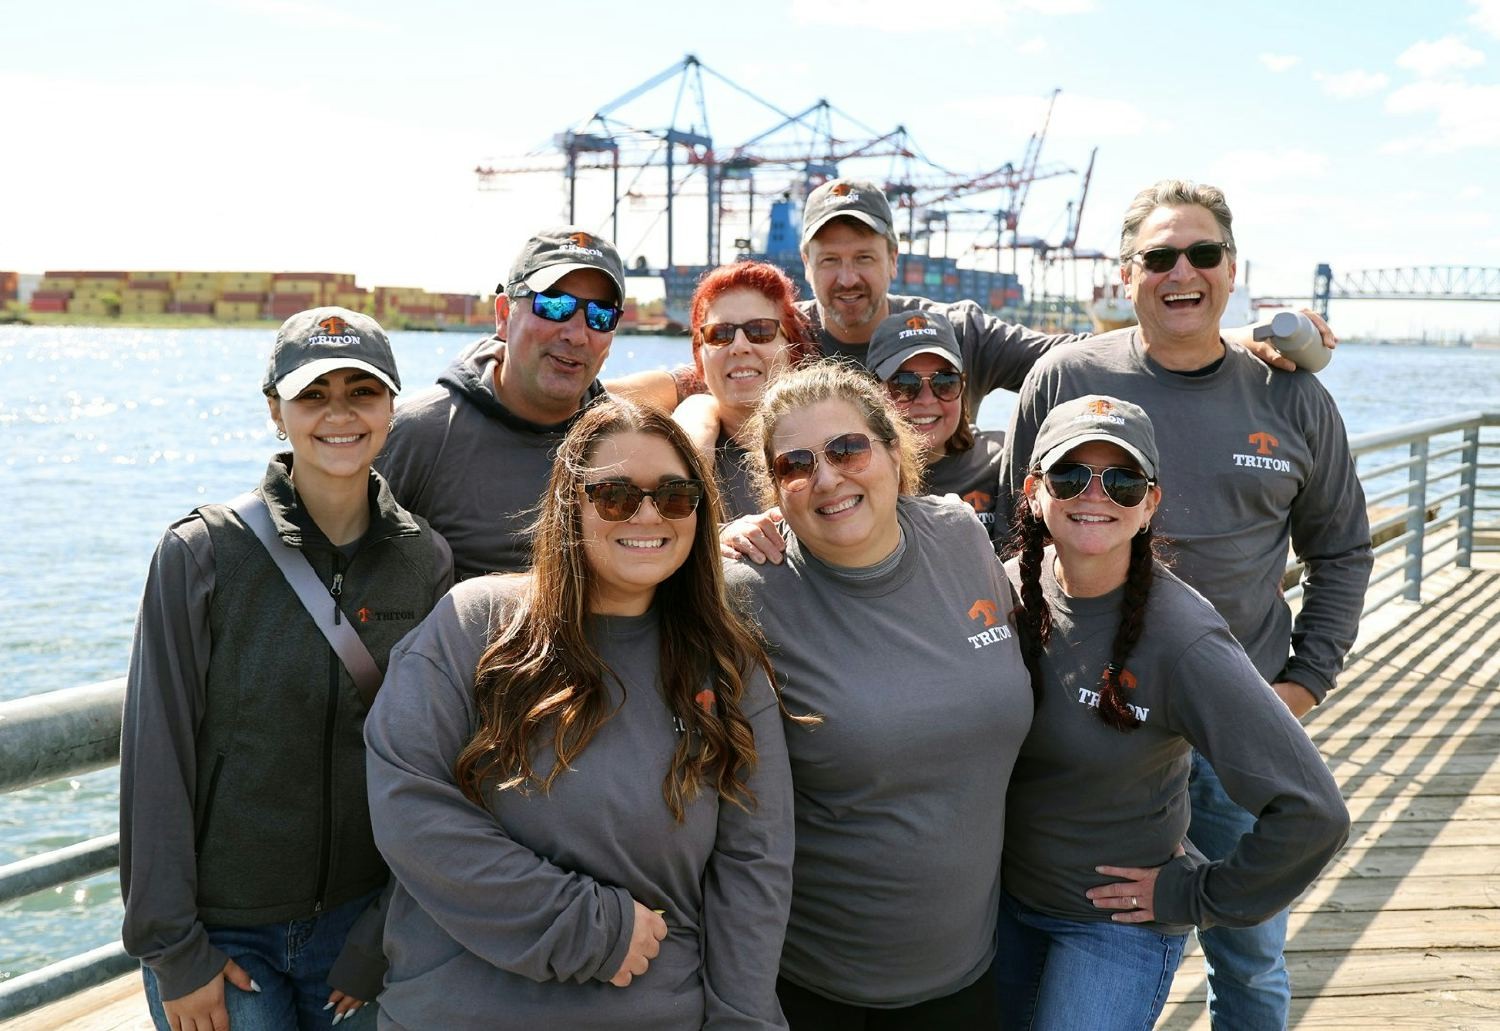 Some New Jersey team members take a day out of the office to volunteer locally to support coastal cleanup efforts.